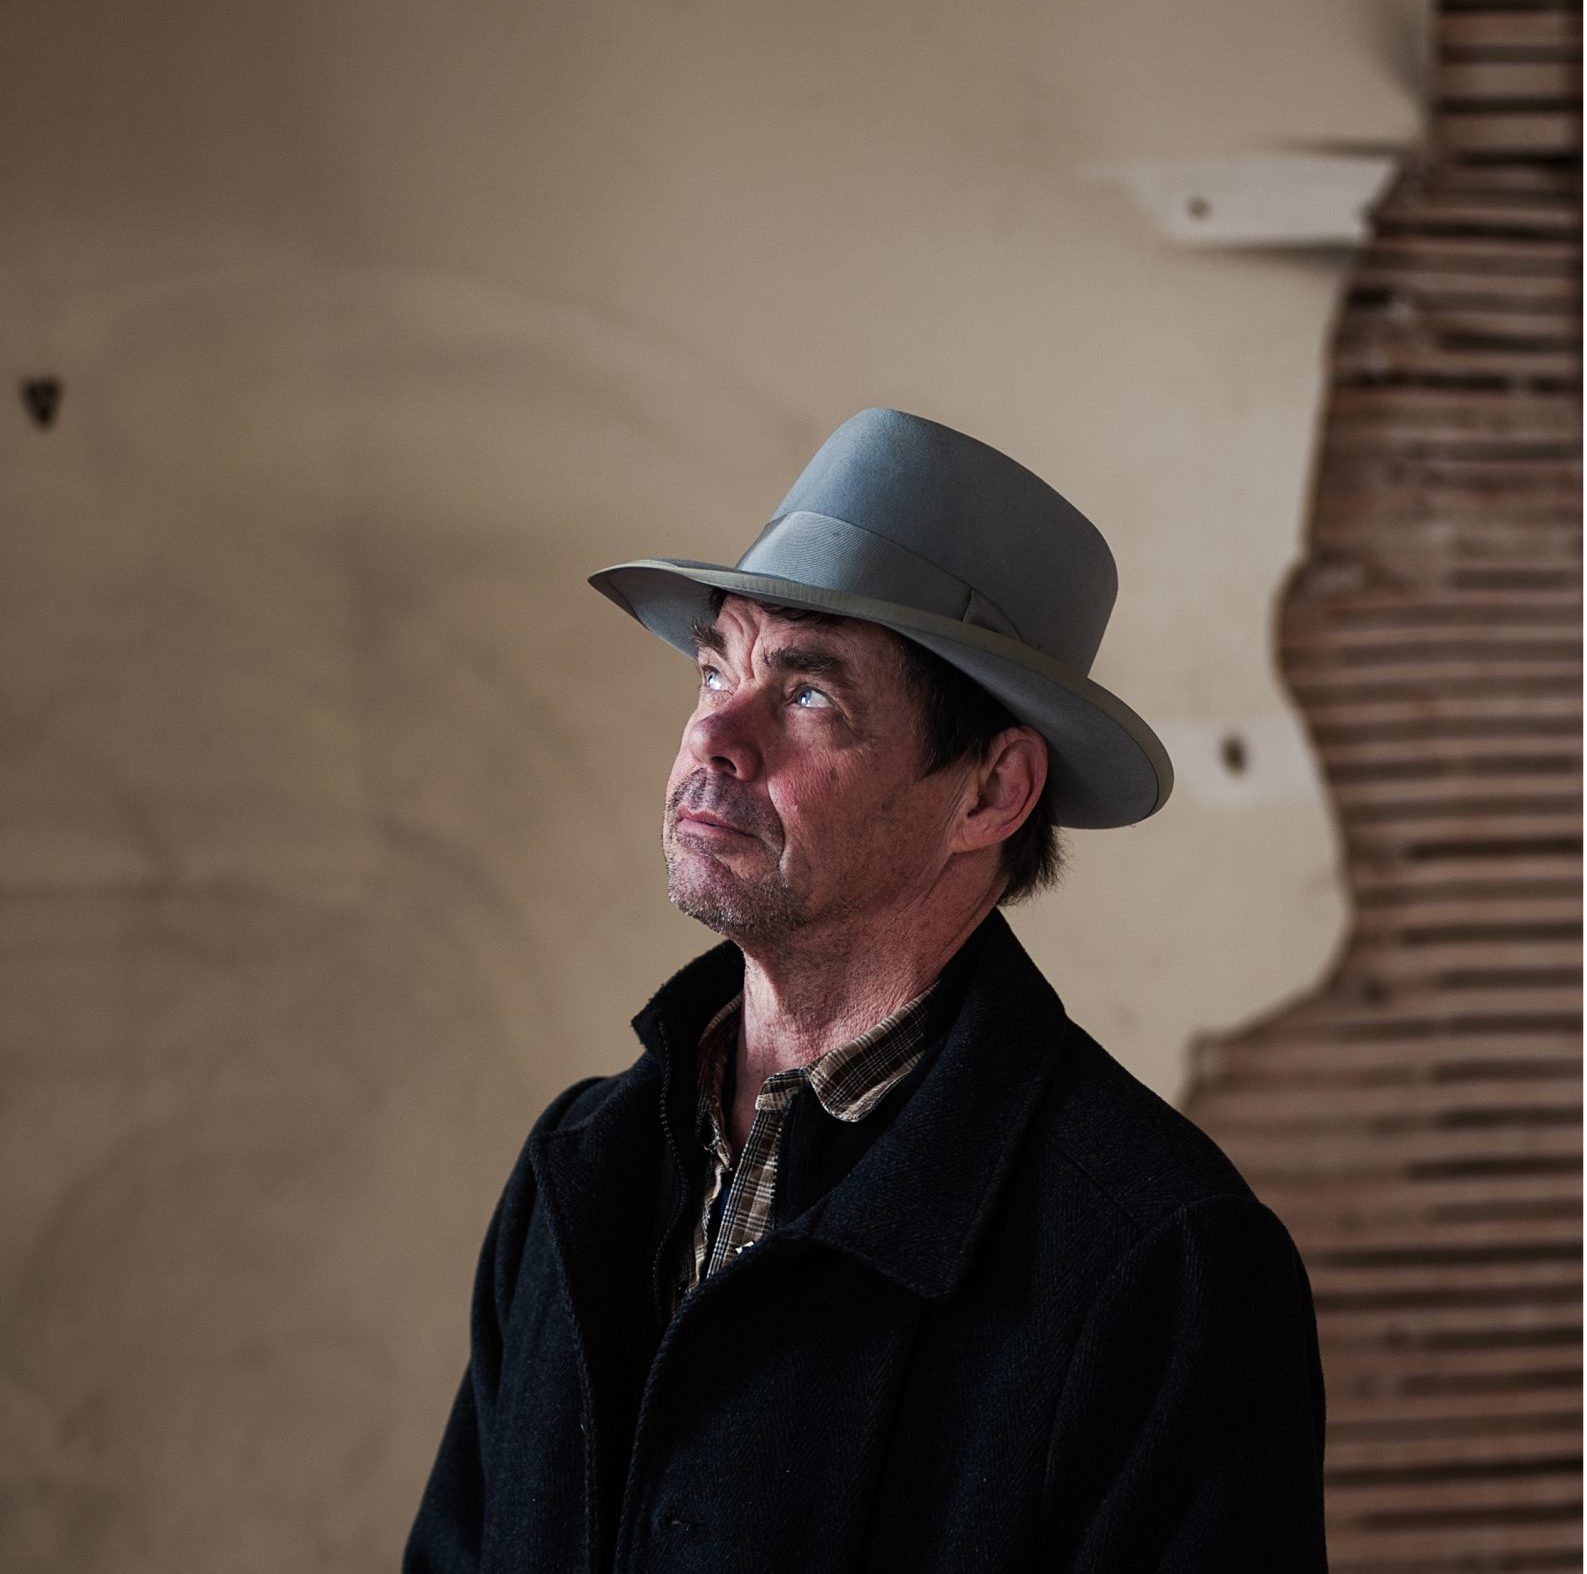 rich hall shot from cannons tour